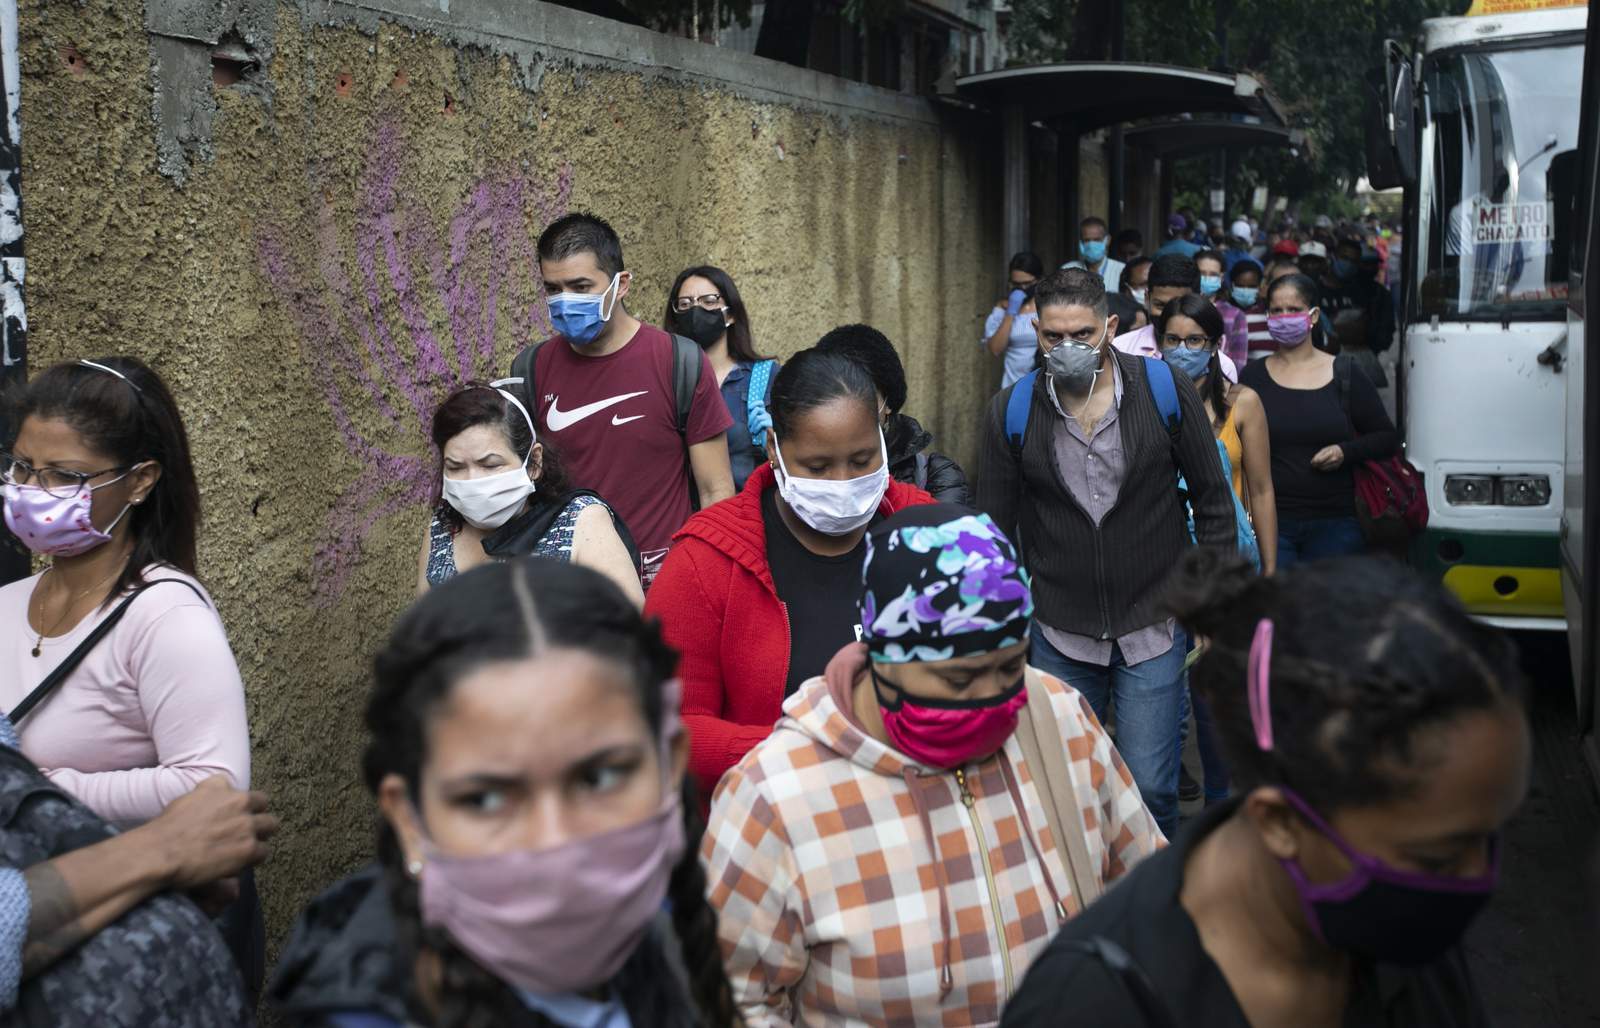 South America ignores Europe and reopens as virus peak nears